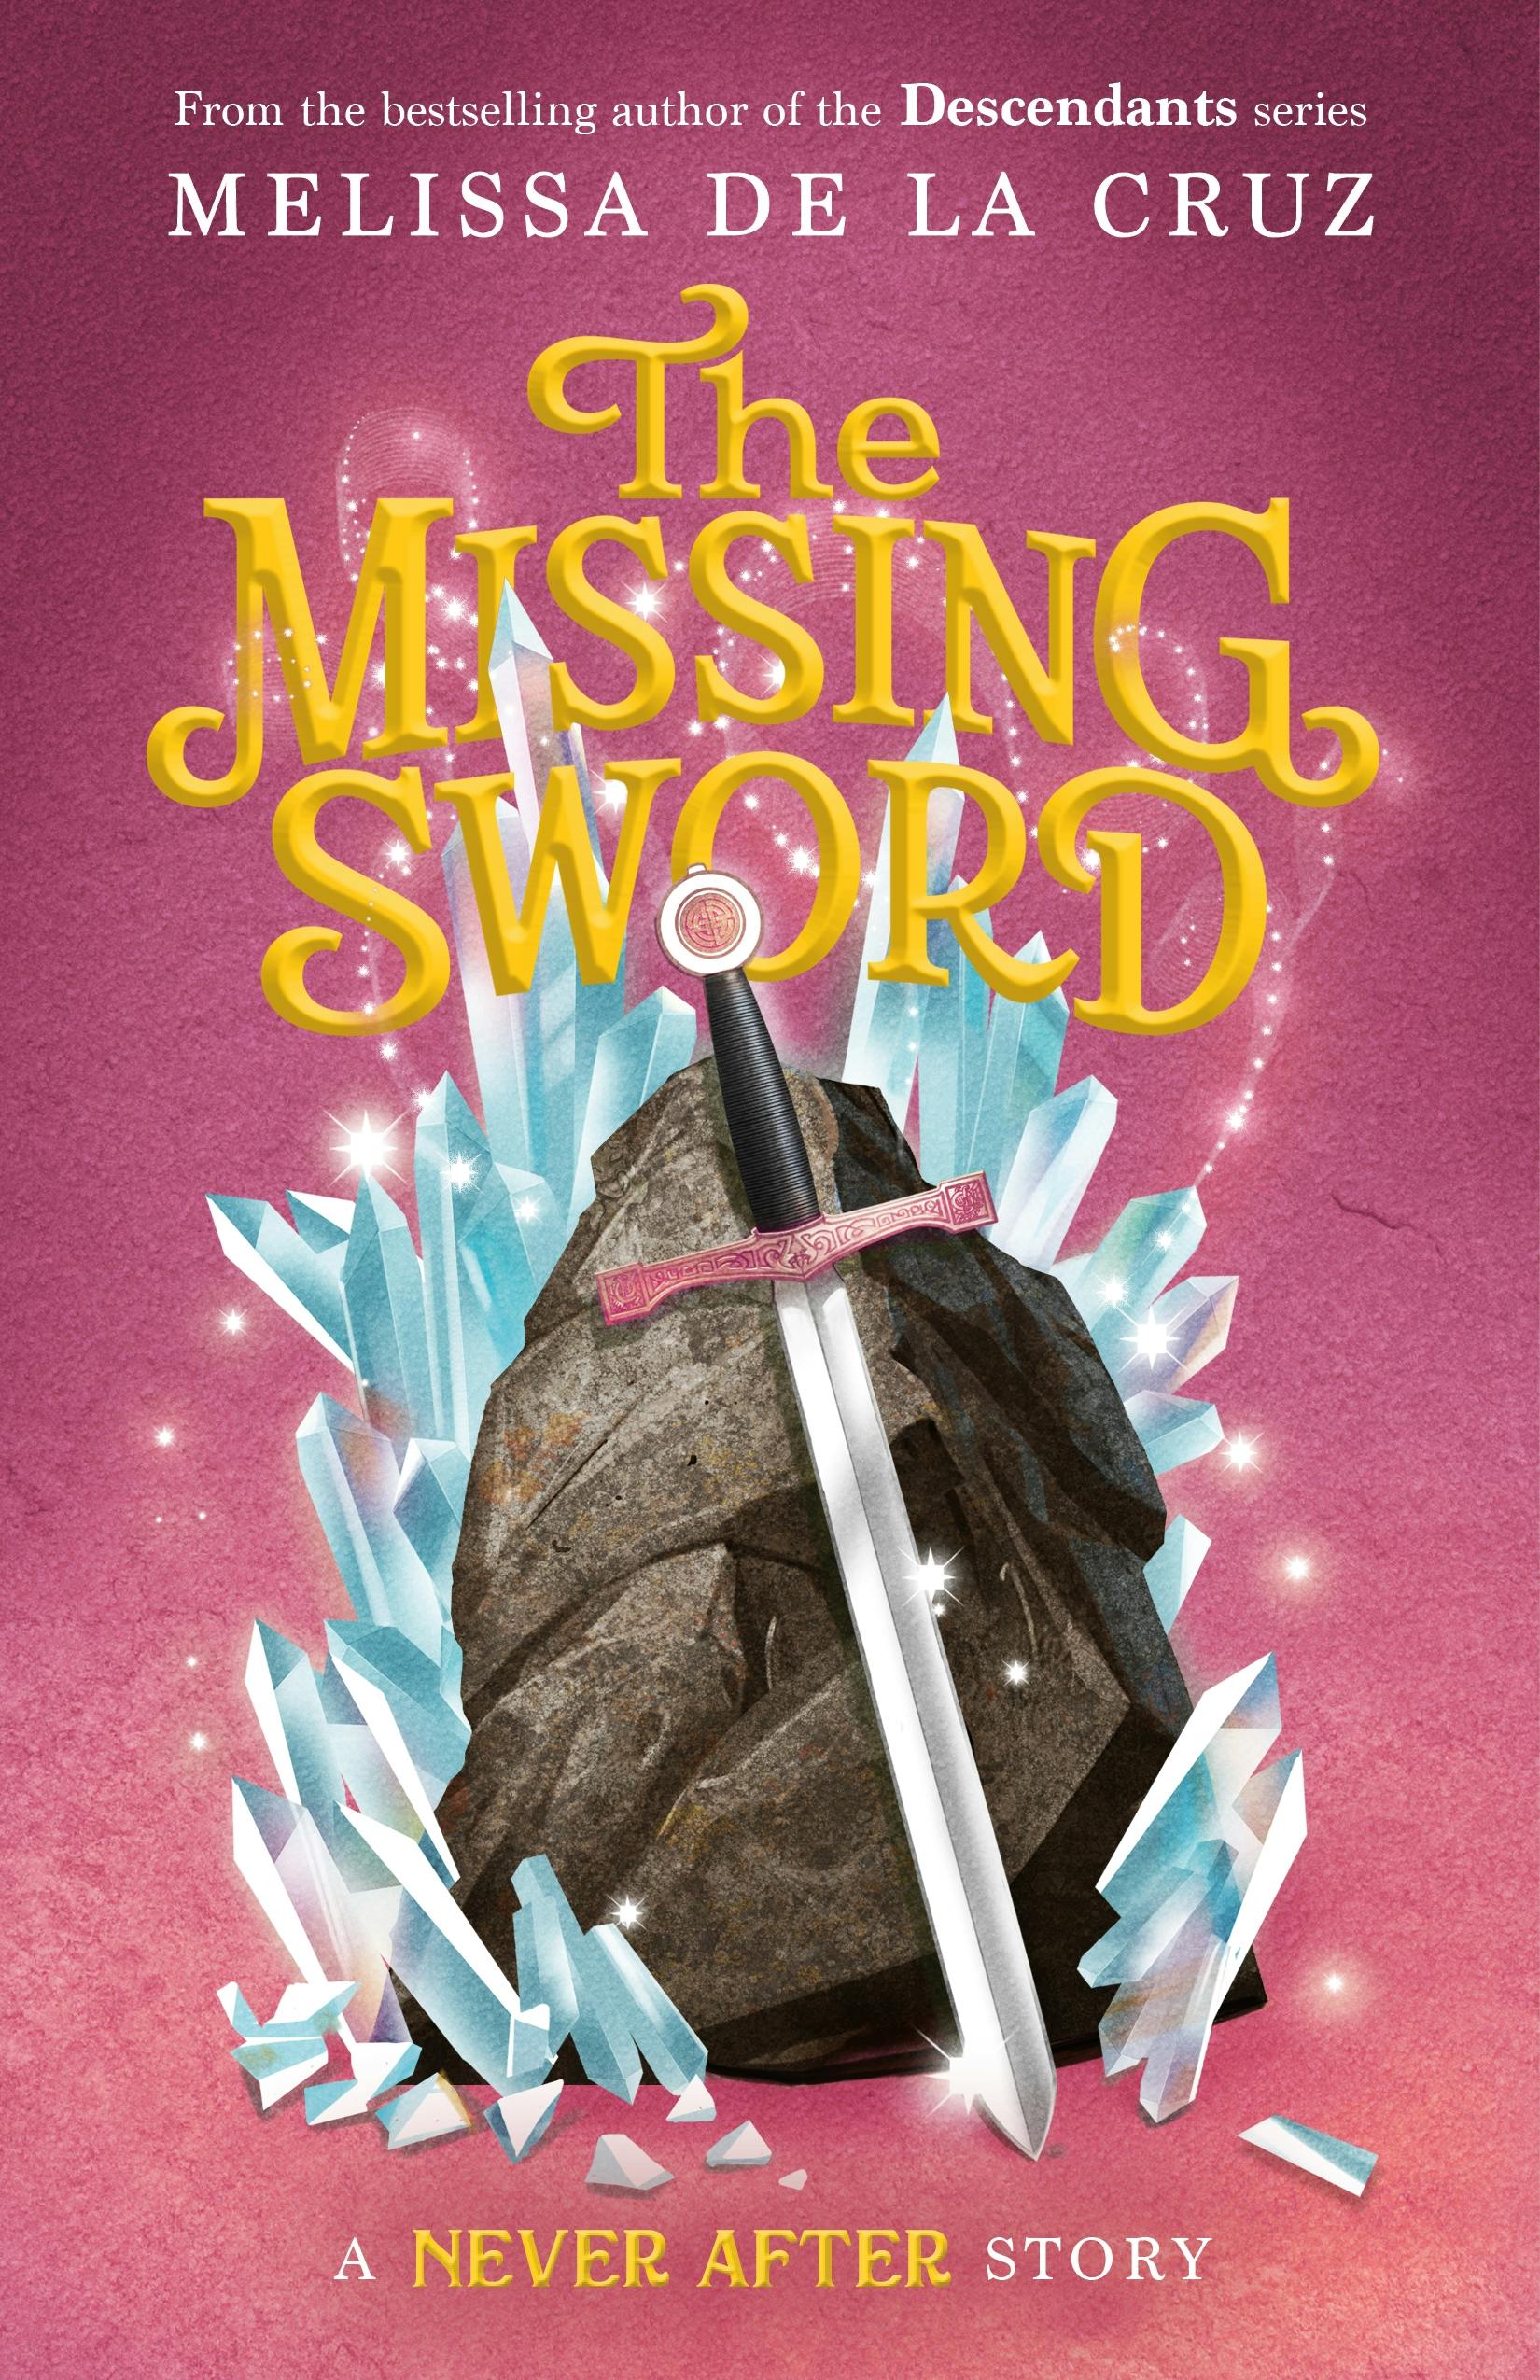 I don't know how I only just realised this, but the Sword and